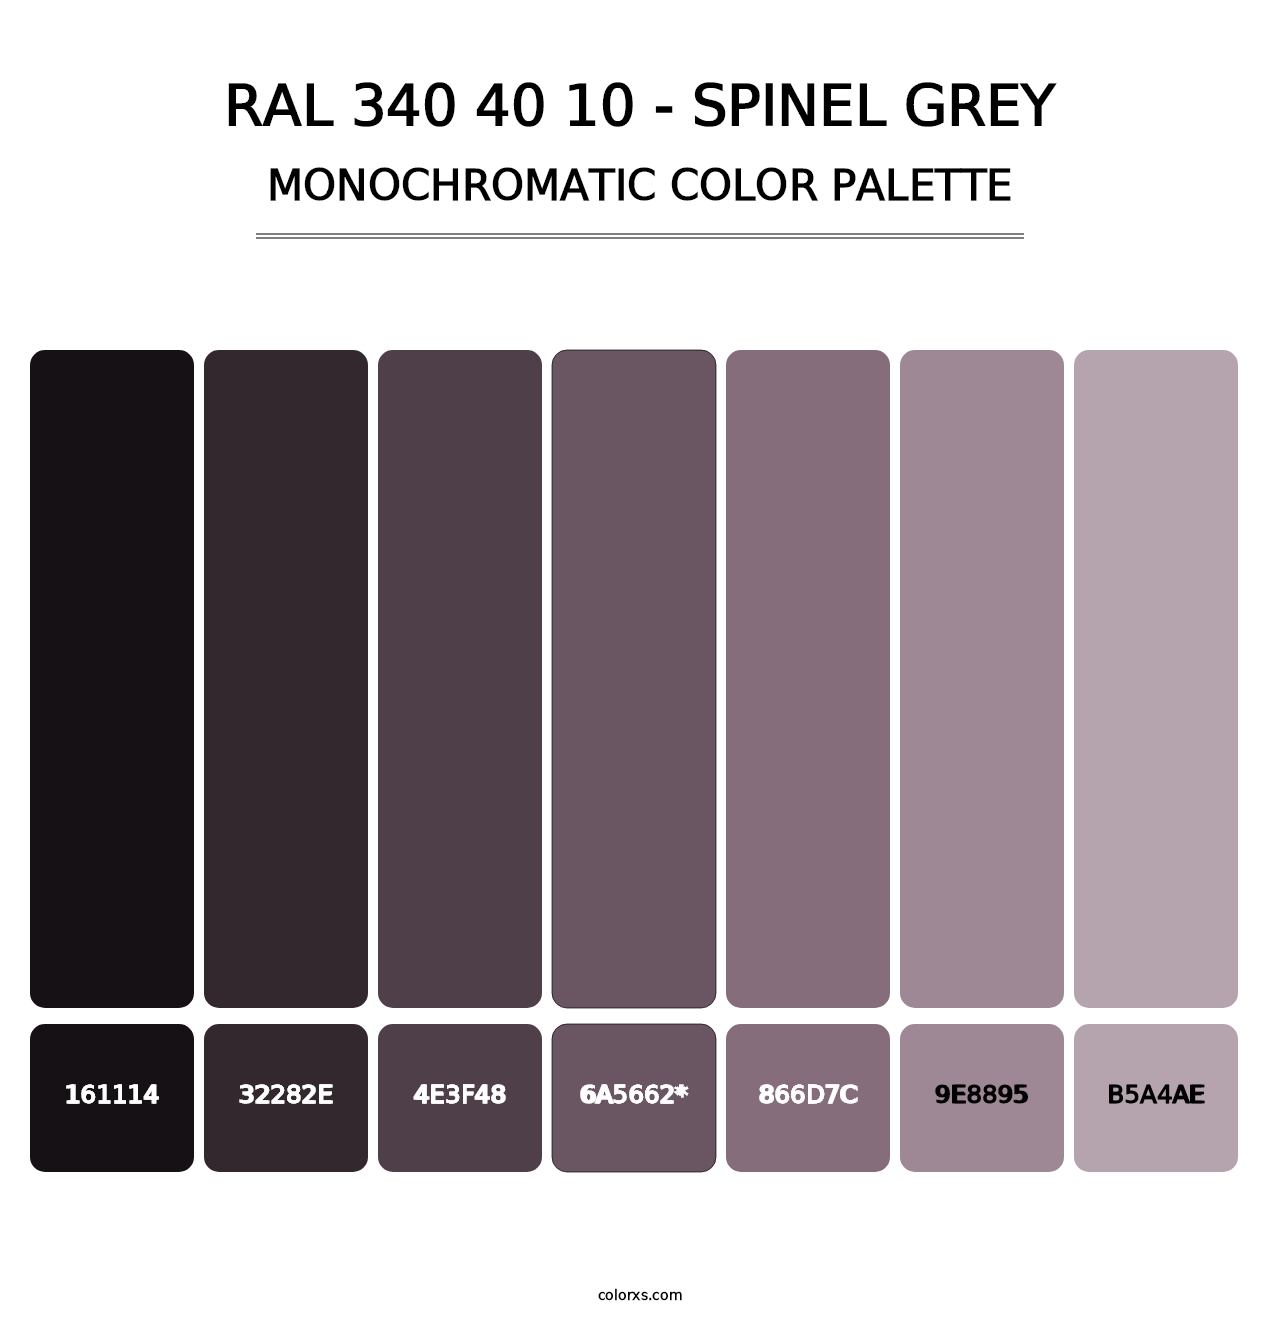 RAL 340 40 10 - Spinel Grey - Monochromatic Color Palette